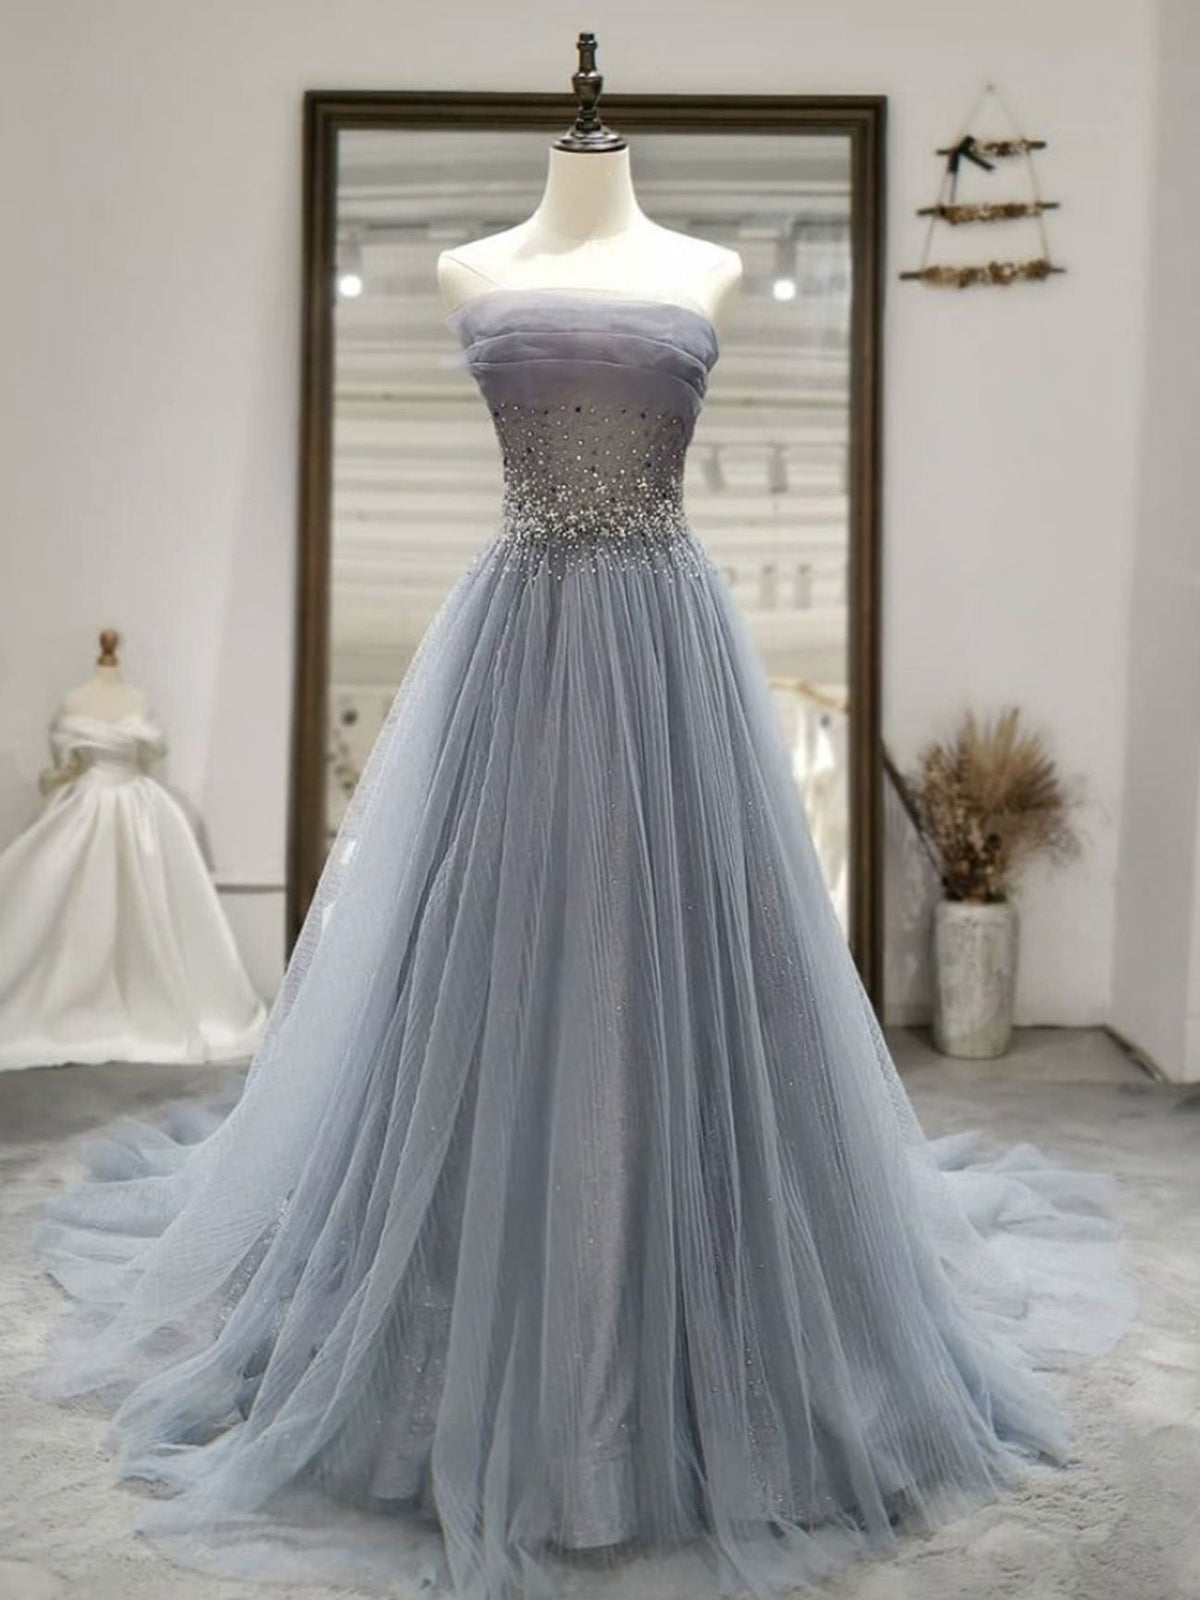 Ariana Grande Inspired Gray Strapless Tulle Ball Gown Prom Dress Grammys  2020